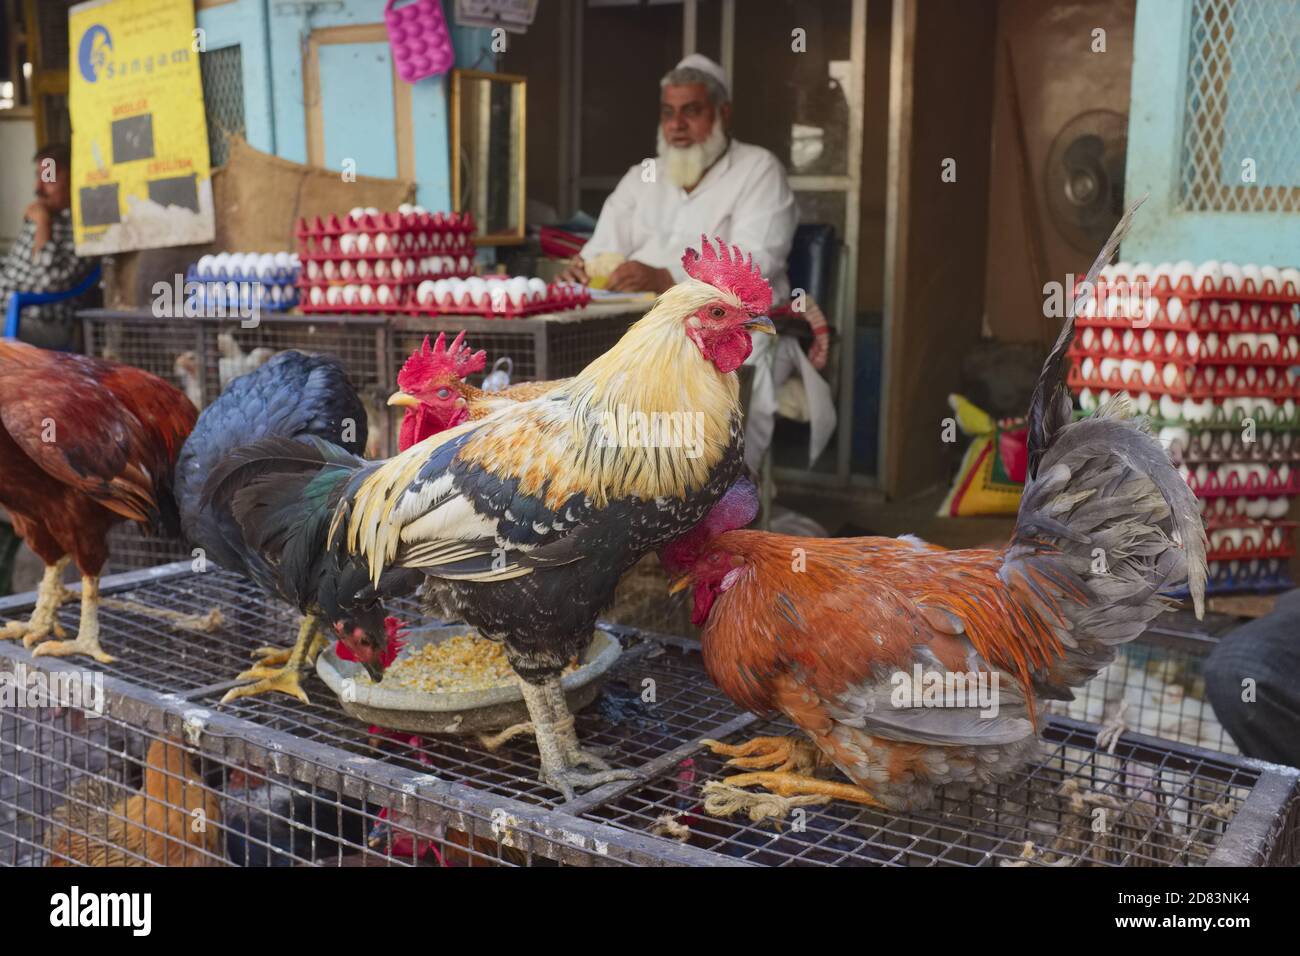 At a chicken and egg shop in Byculla, Mumbai, India, roosters sit on cages, the Muslim vendor with crates of eggs in the background Stock Photo